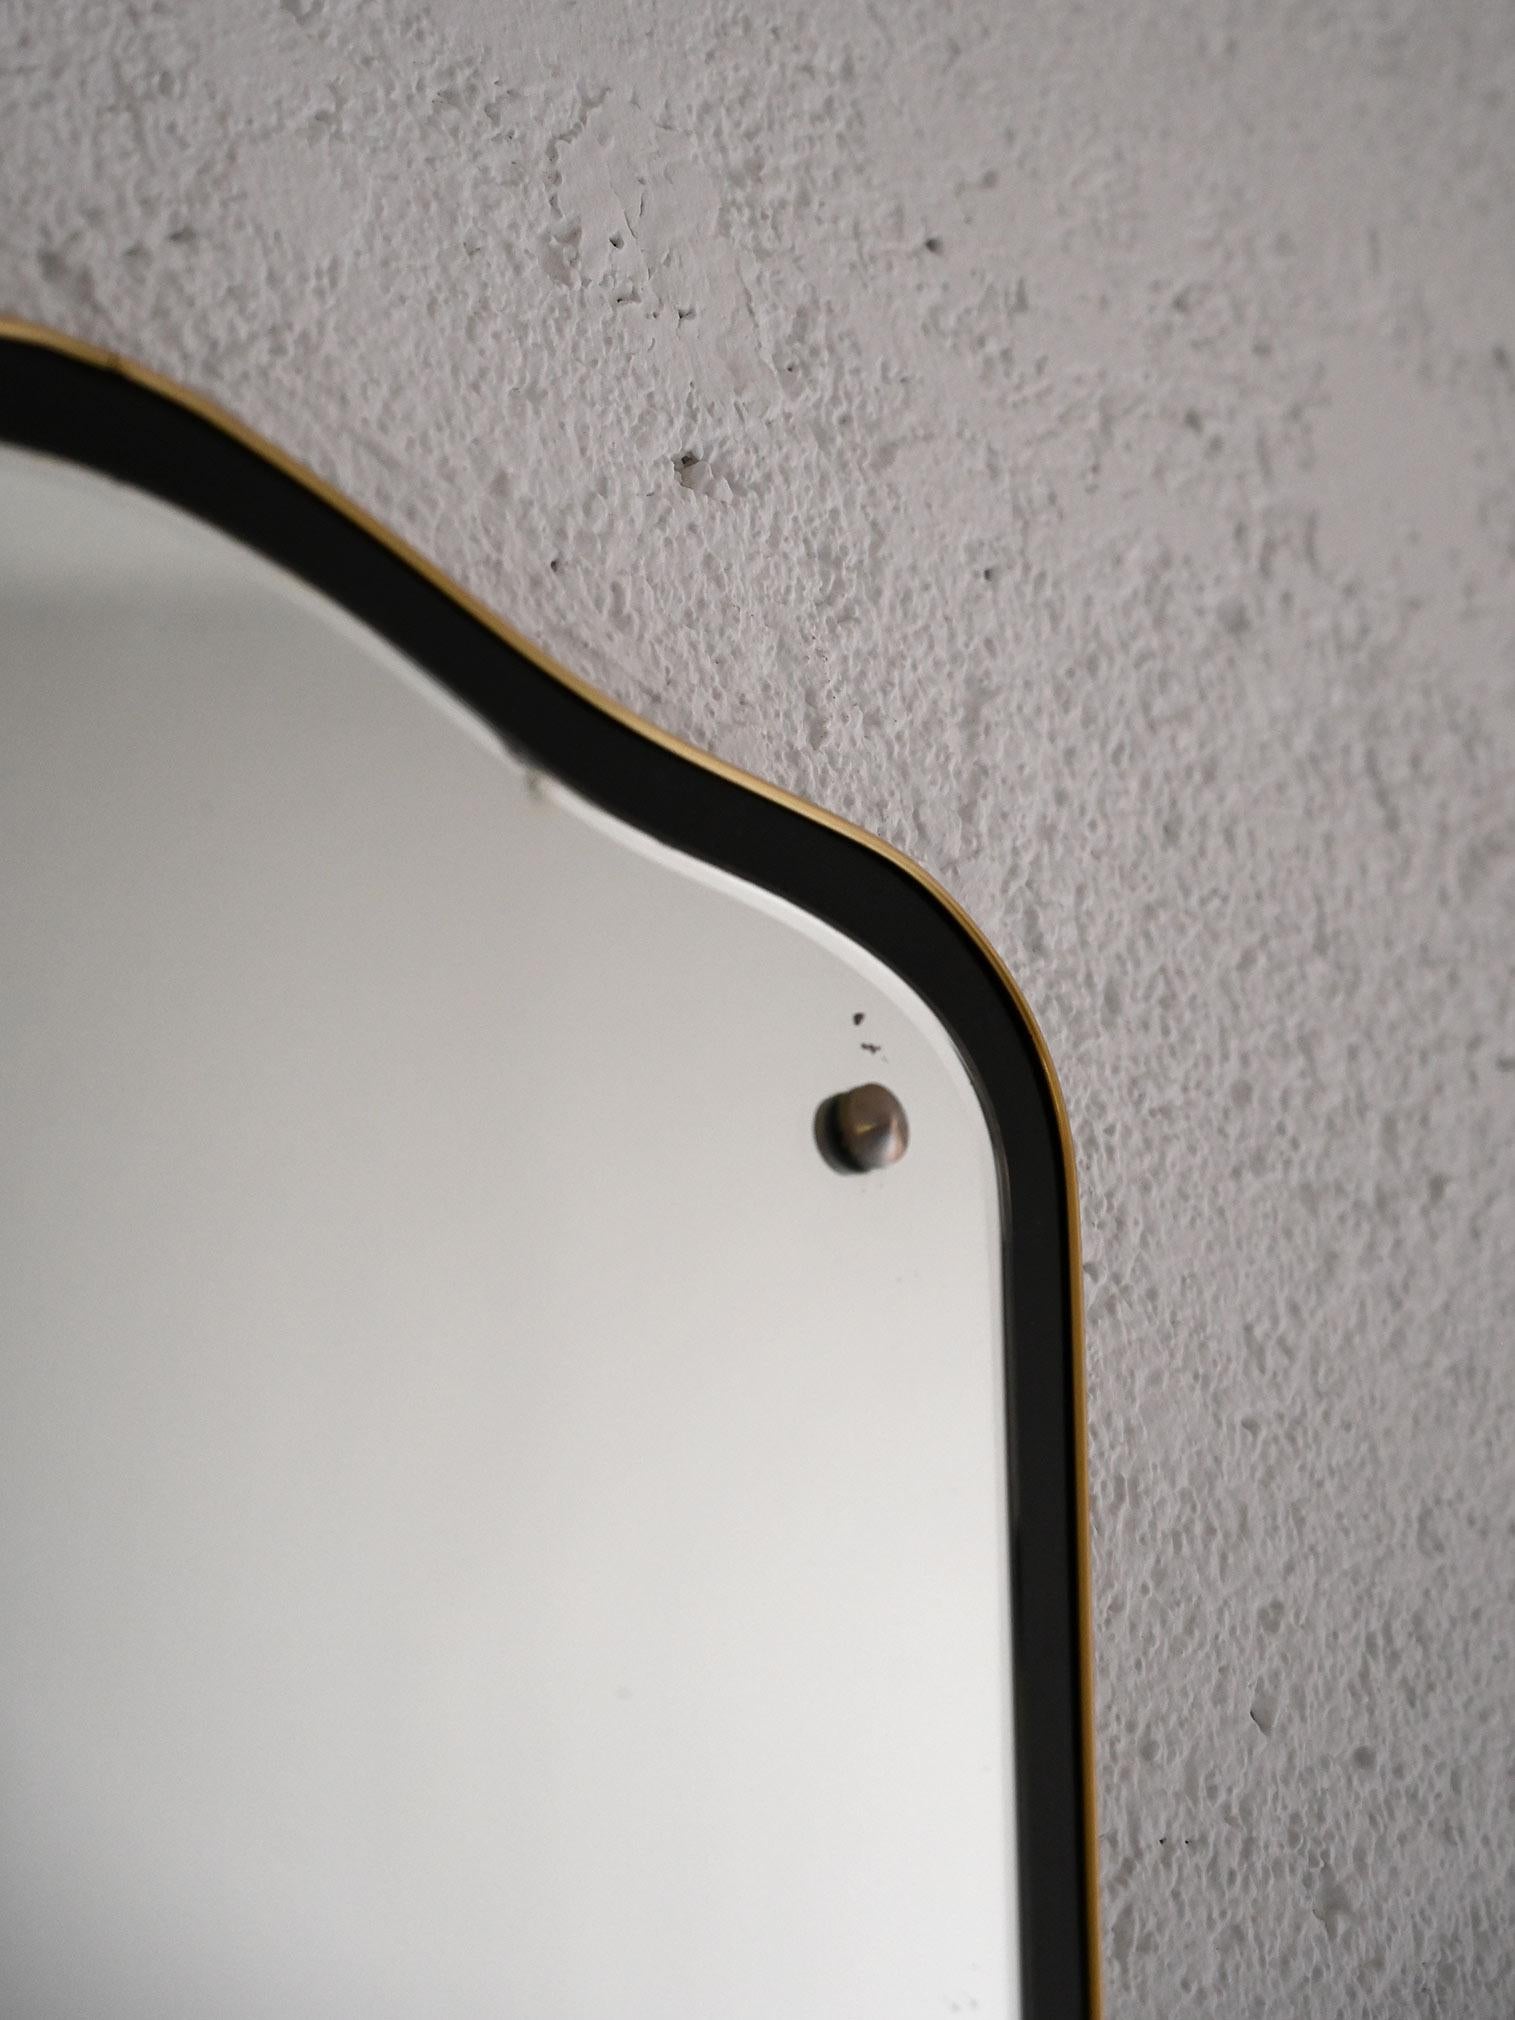 Scandinavian original 1940s mirror.

An elegant piece of furniture with a classic taste that harks back to the atmosphere of yesteryear. Ideal for giving the room a retro touch.

Good condition. May show some signs of time. Please pay attention to